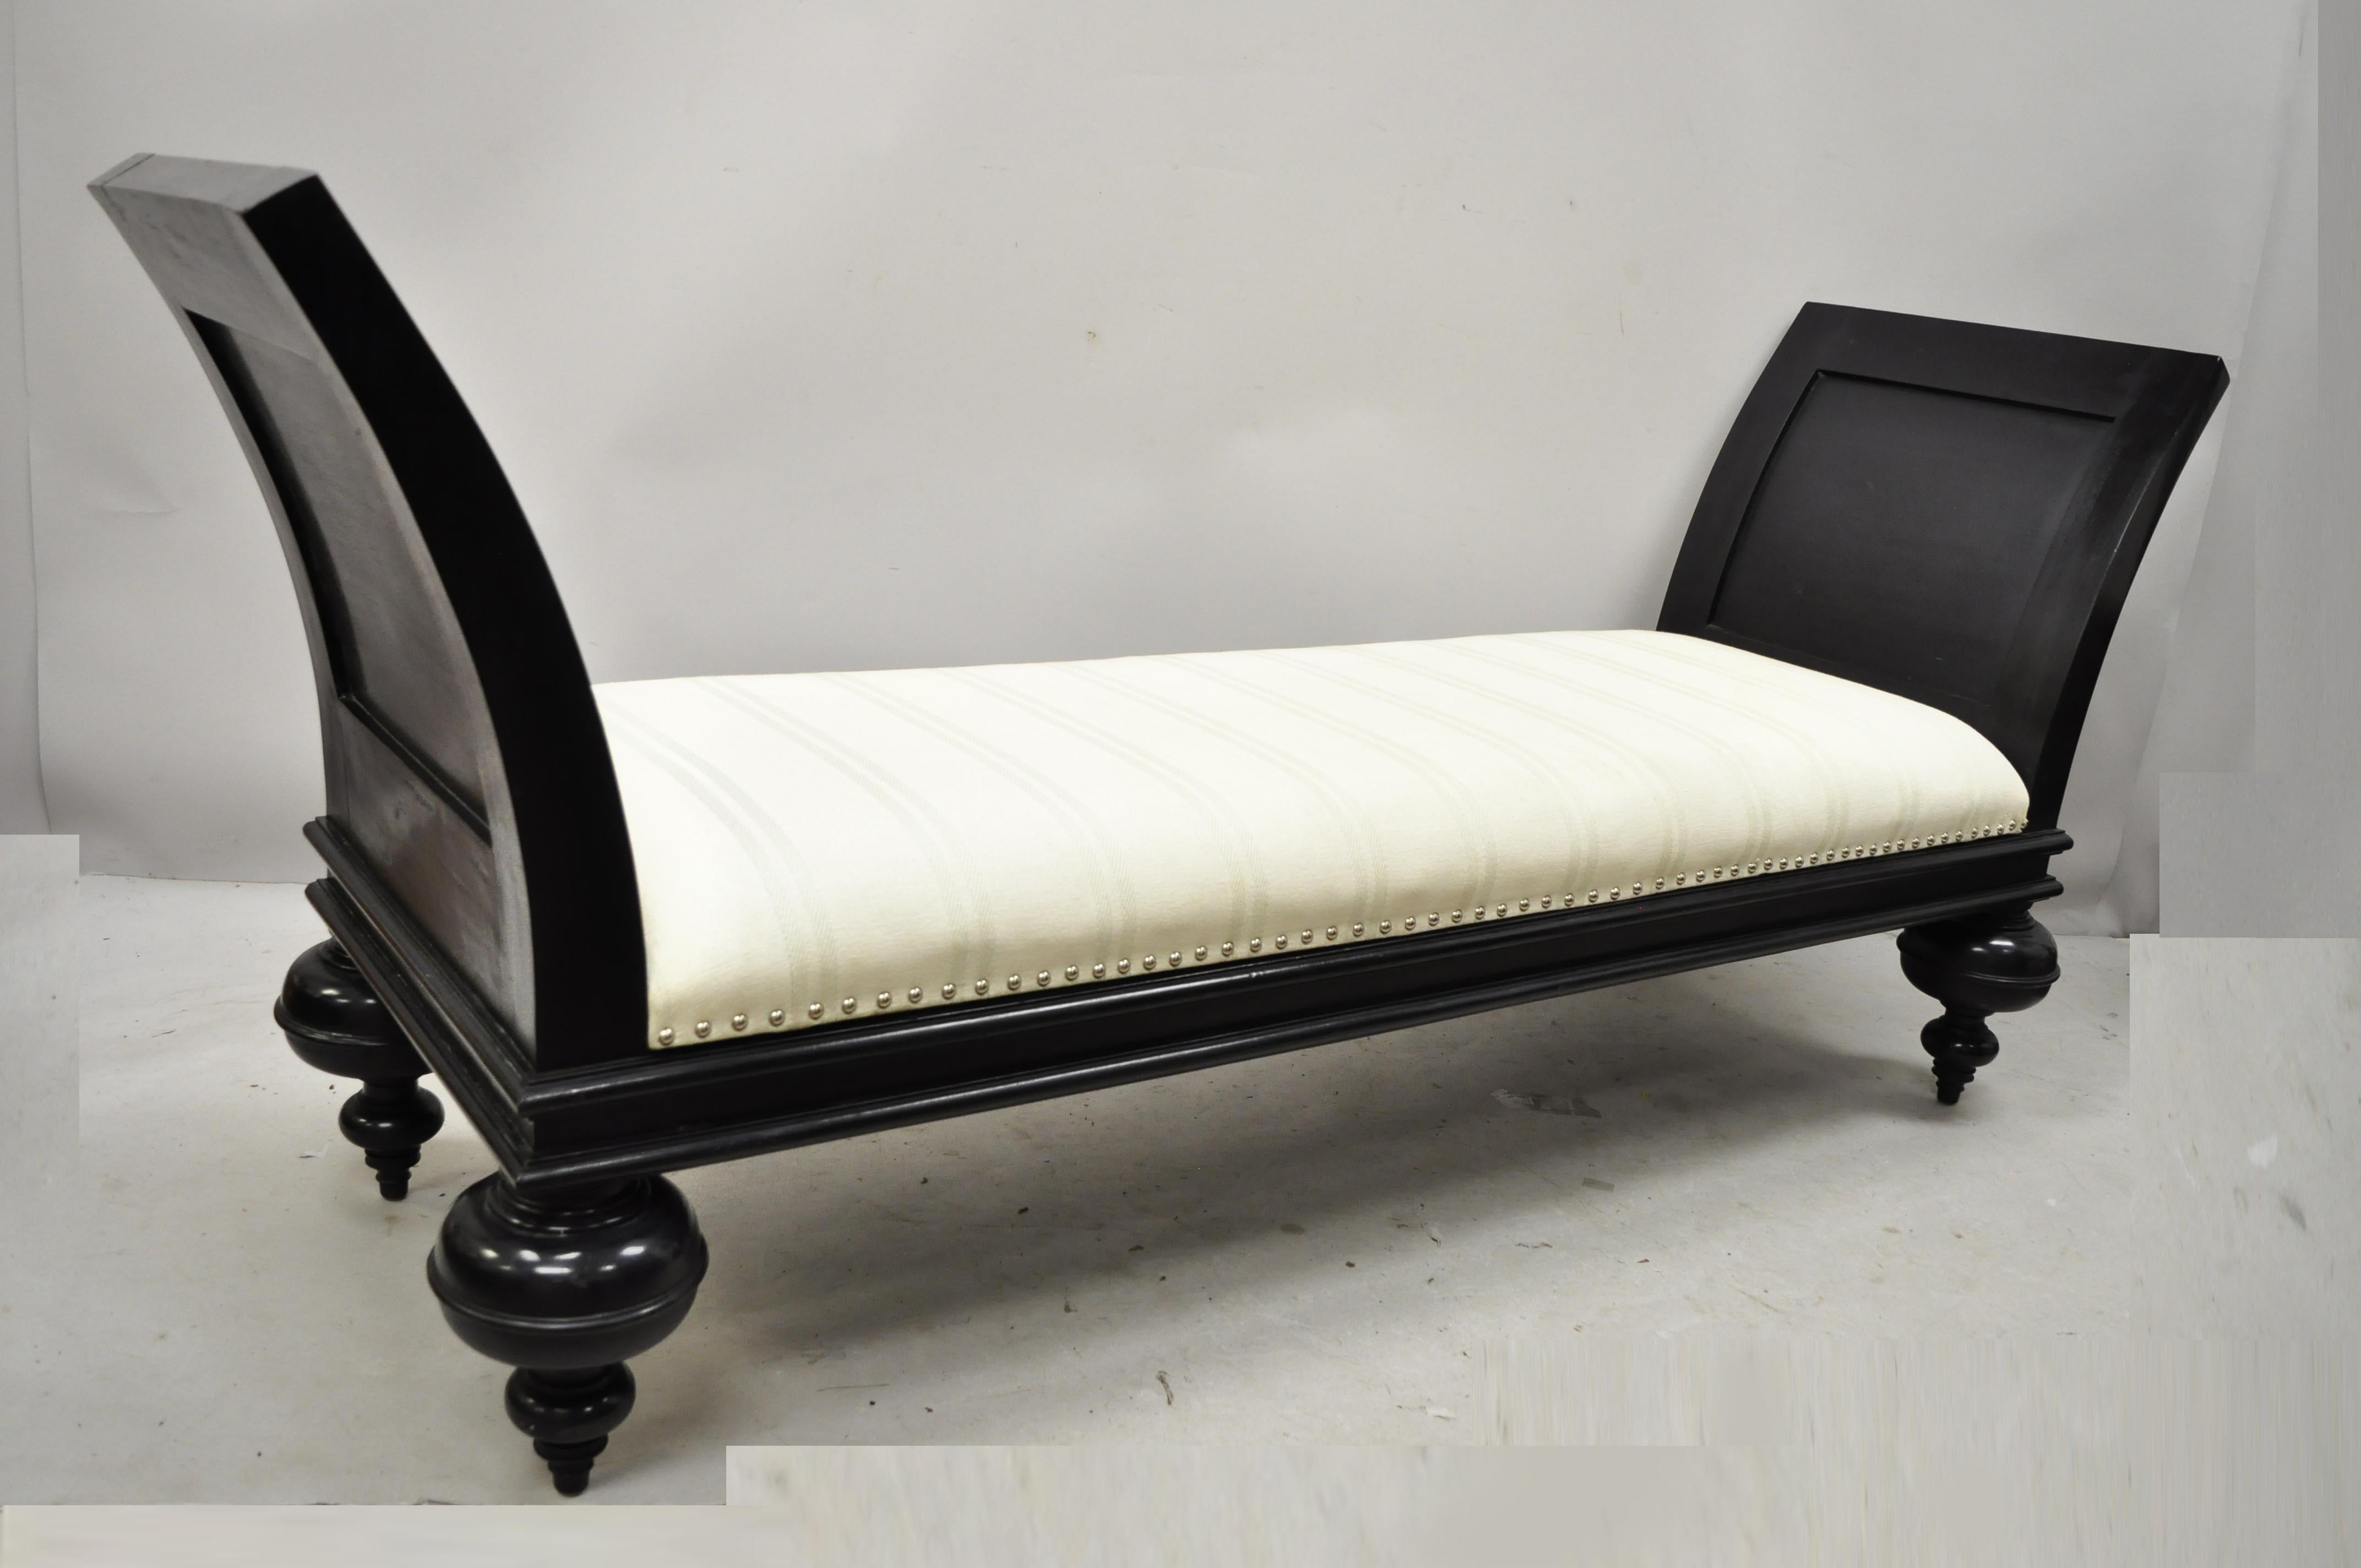 Late 20th century Hollywood Regency Italian style large black bun feet window bench. Item features burlap upholstered seat with green stripes, turn carved bun form feet, flared arms, black distressed finish, very nice item, great style and form,